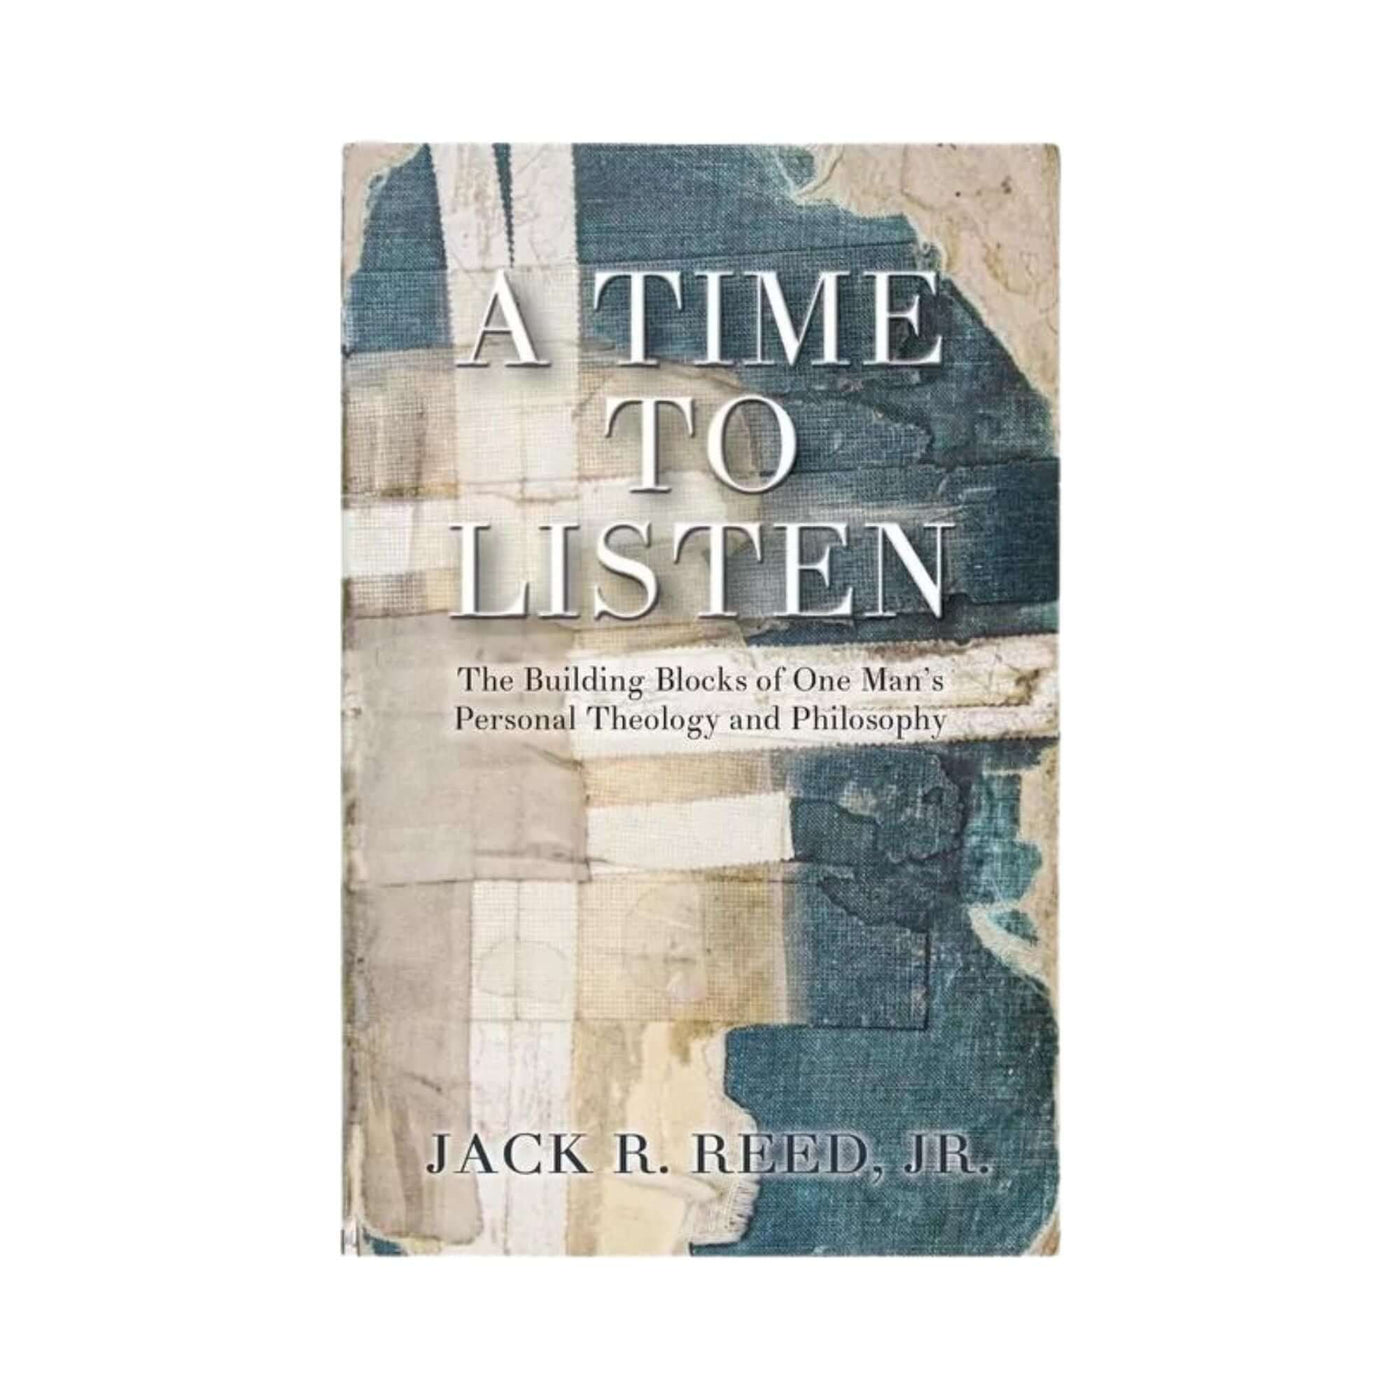 A Time To Listen by Jack Reed, Jr. (Softcover)